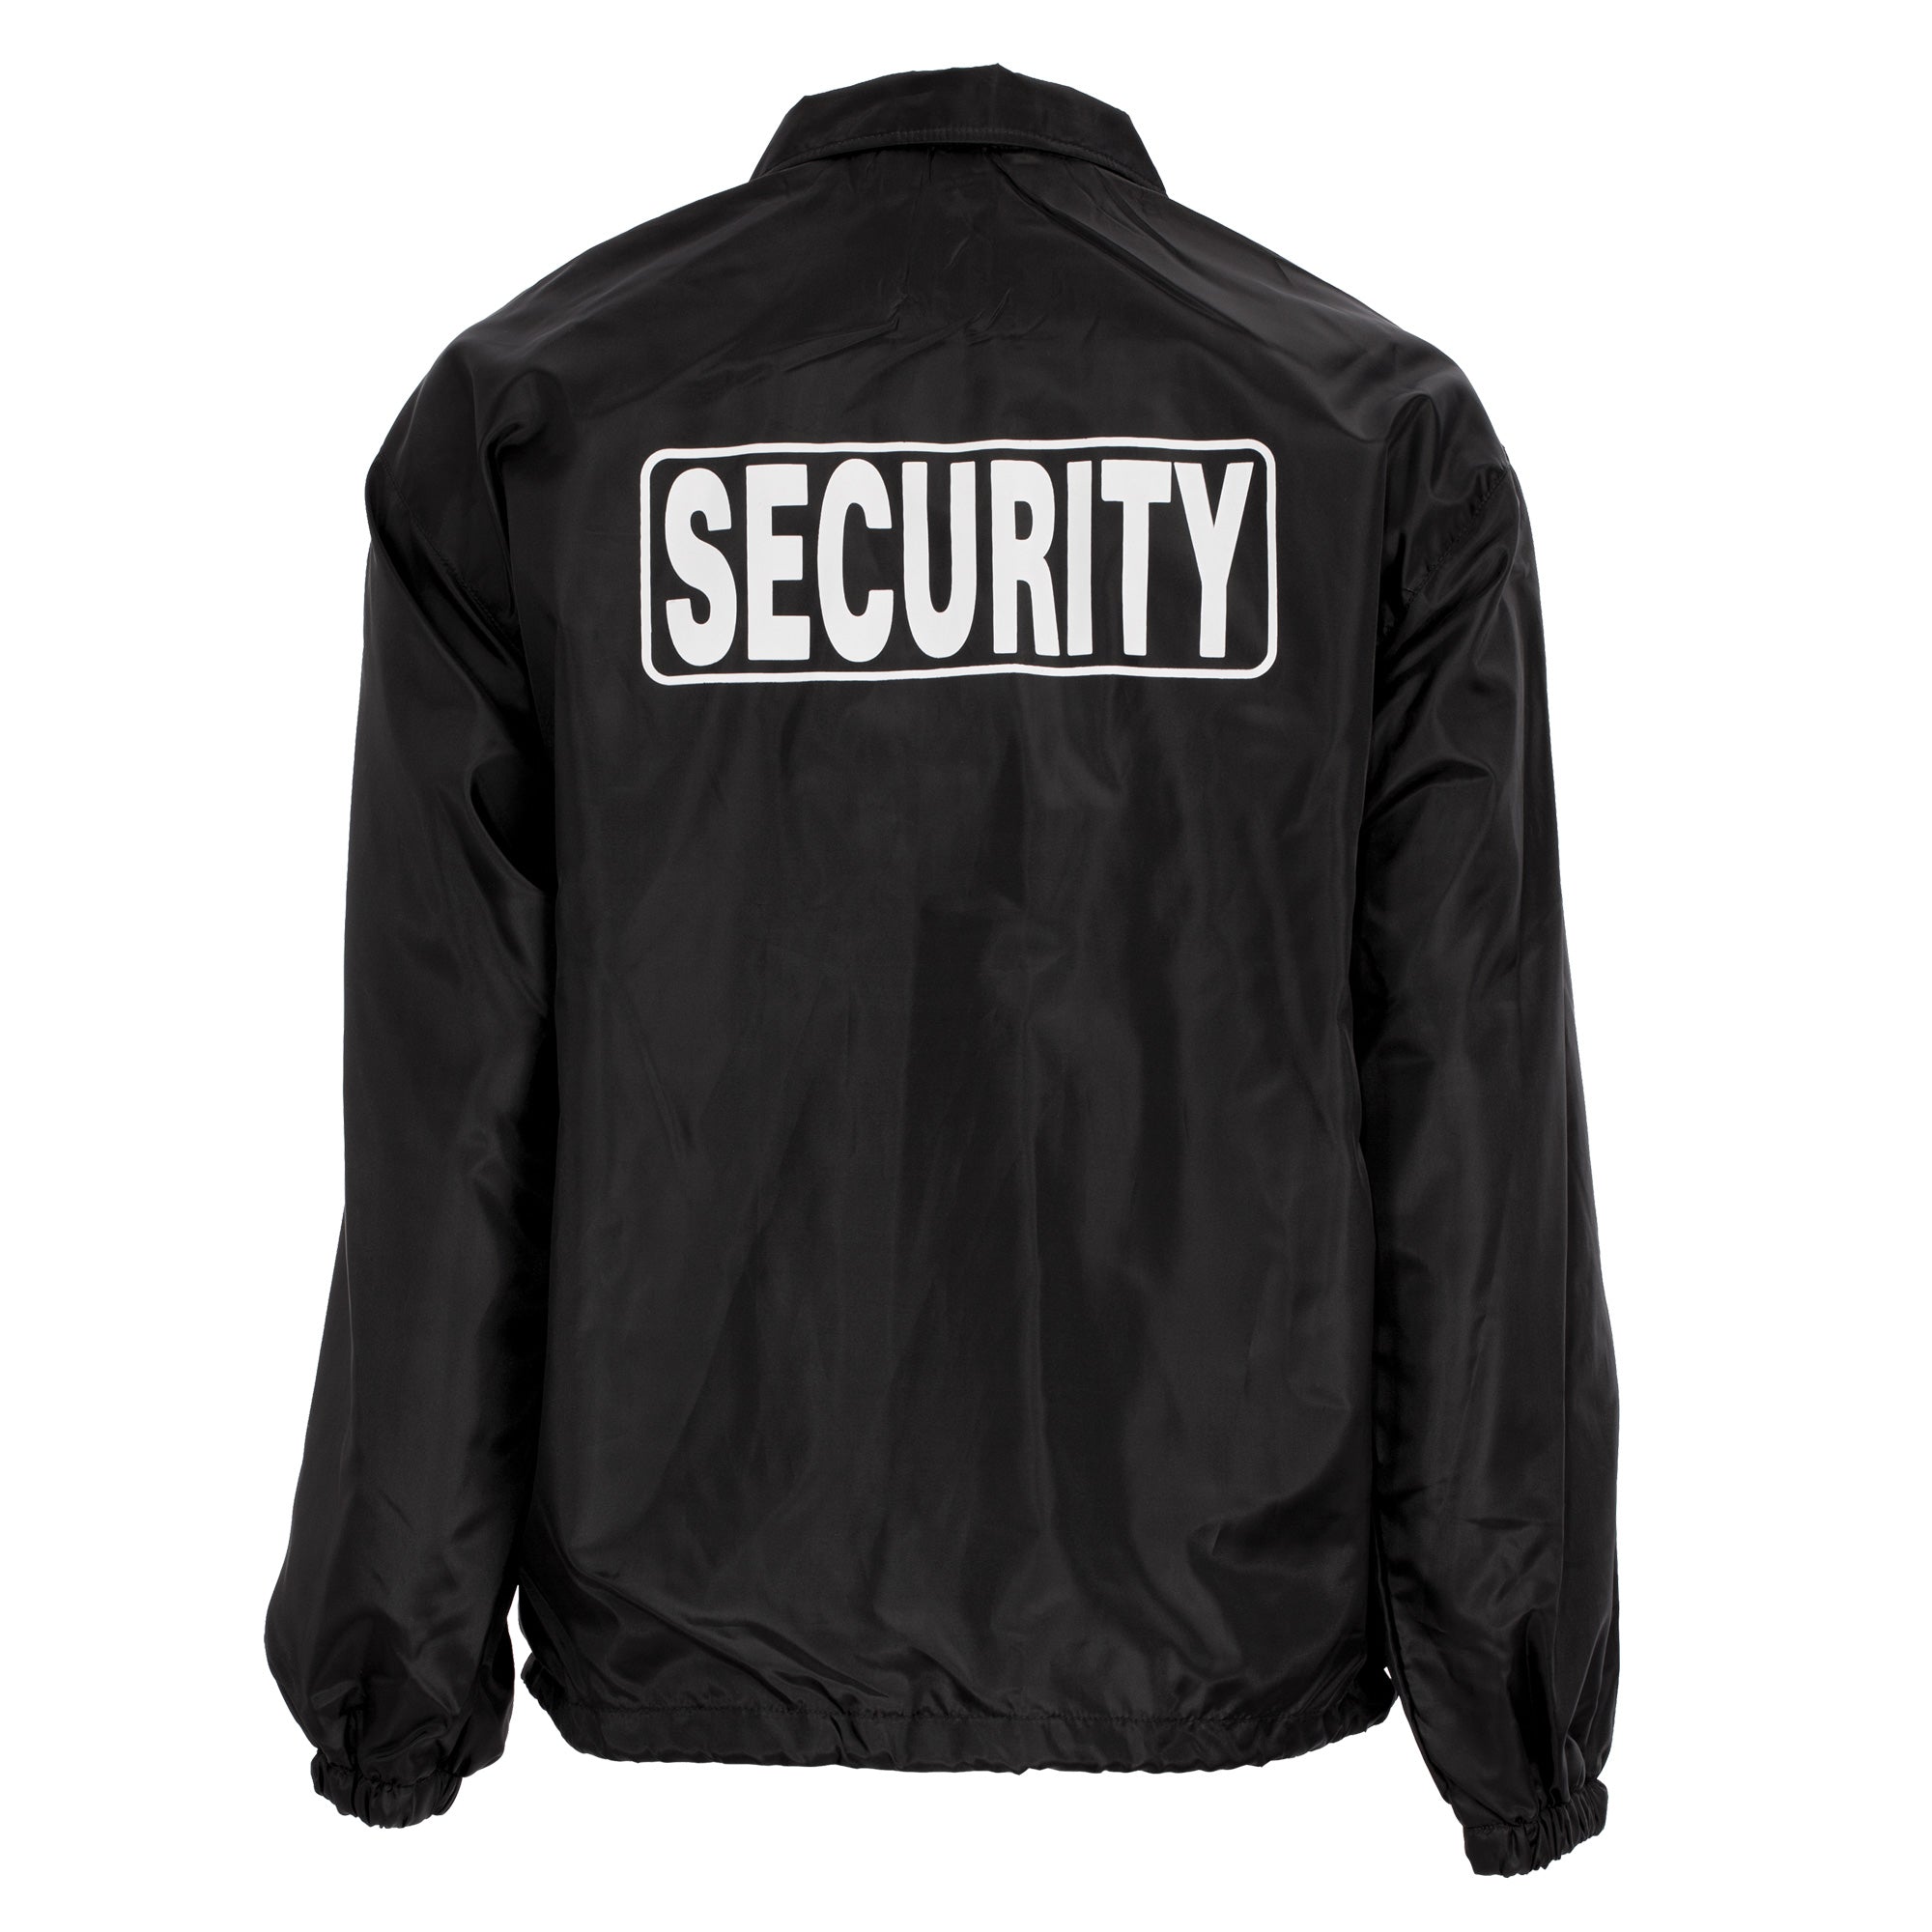 Tact Squad Classic Windbreaker SECURITY Printed black color back